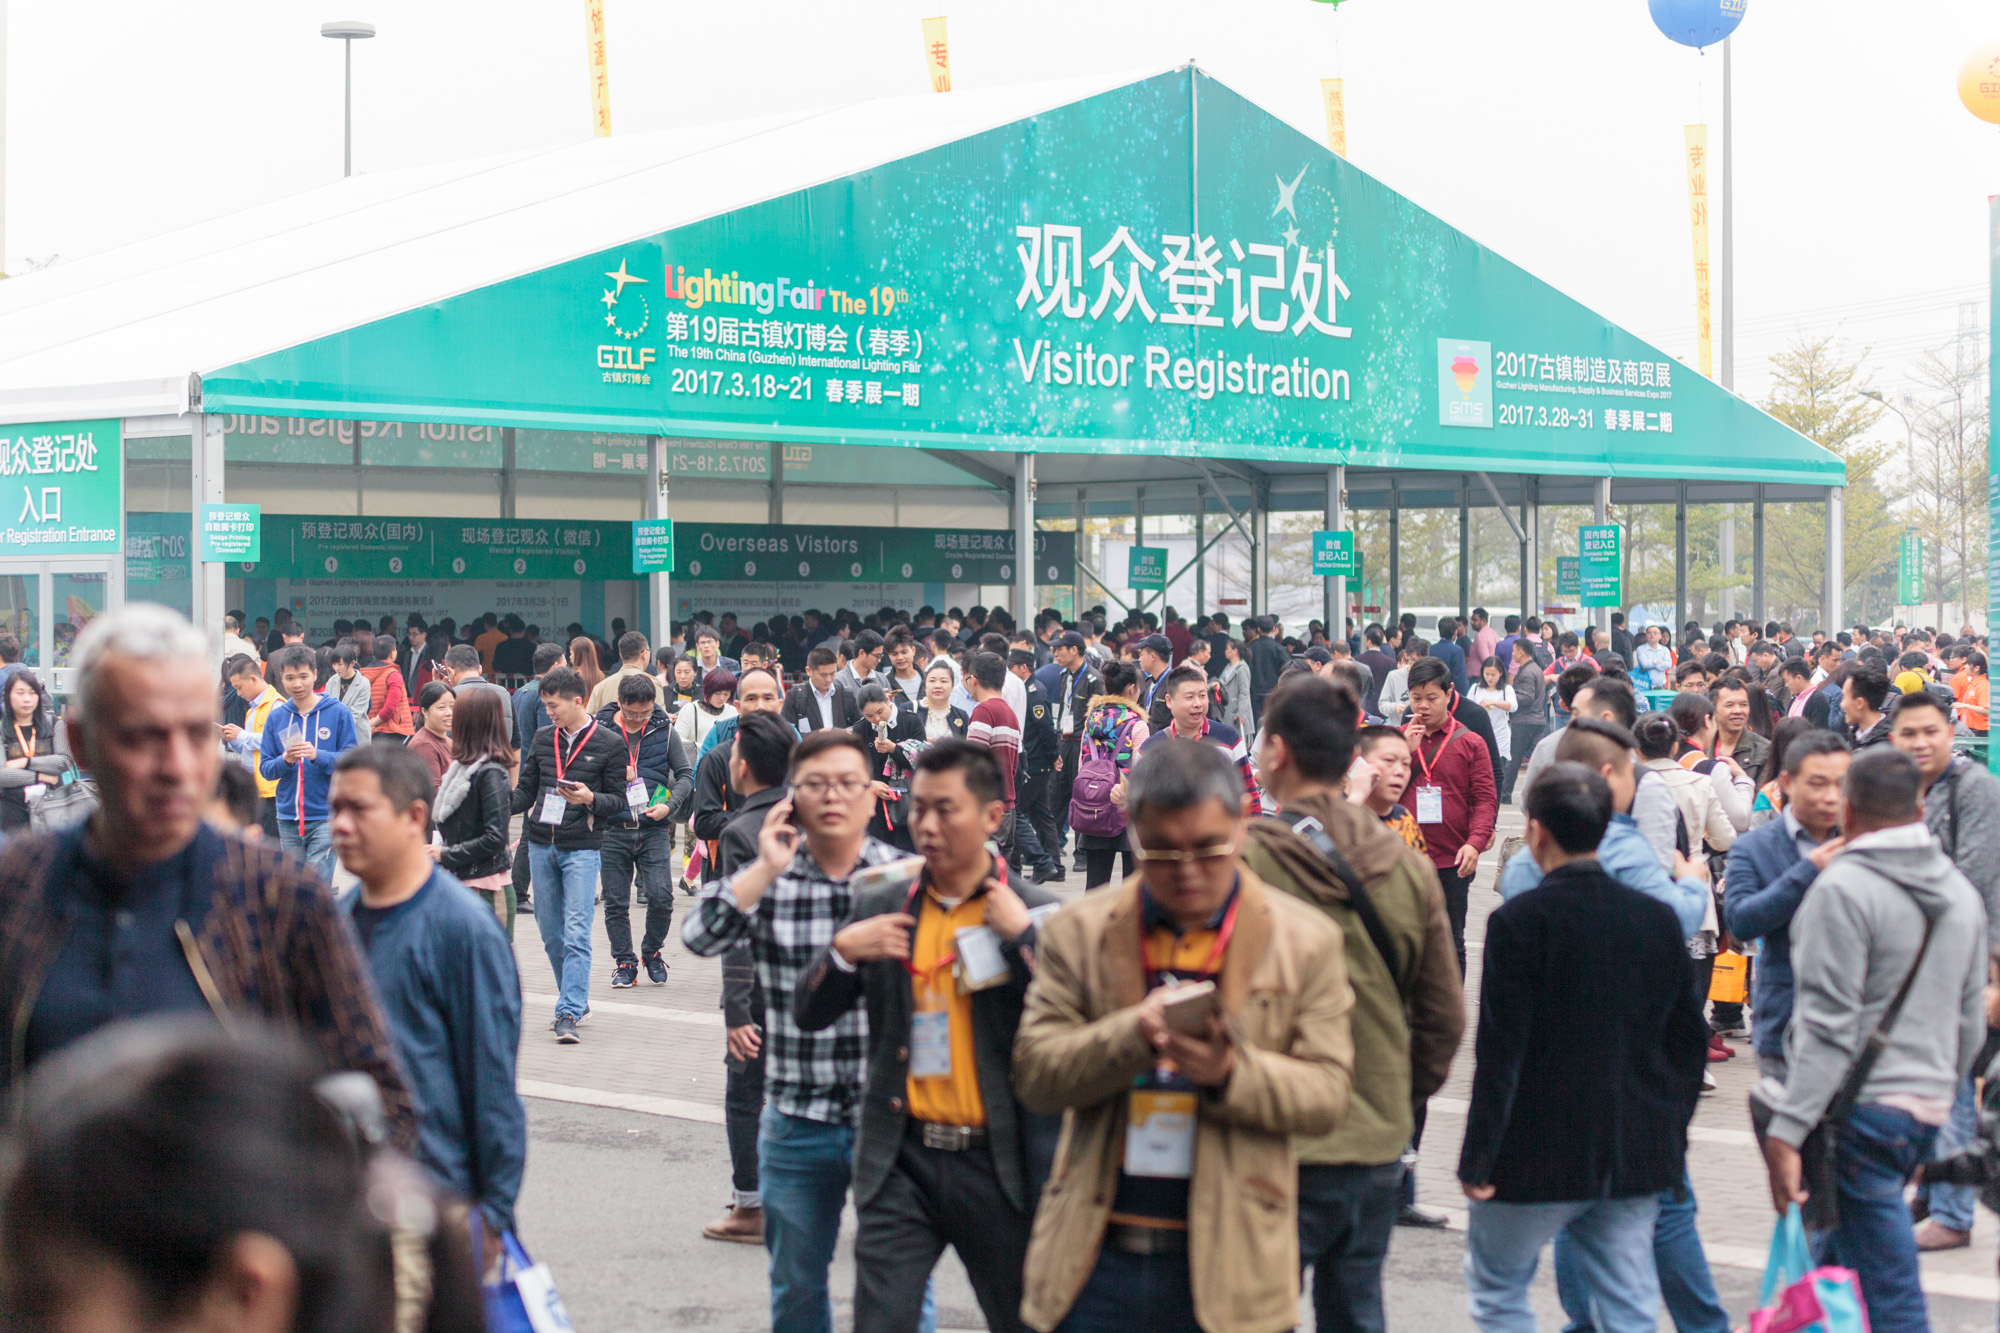 The 19th Guzhen Lighting Fair (Spring, Phase I)Drew to a Close, Followed by Spring Phase II on March 28th to 31st